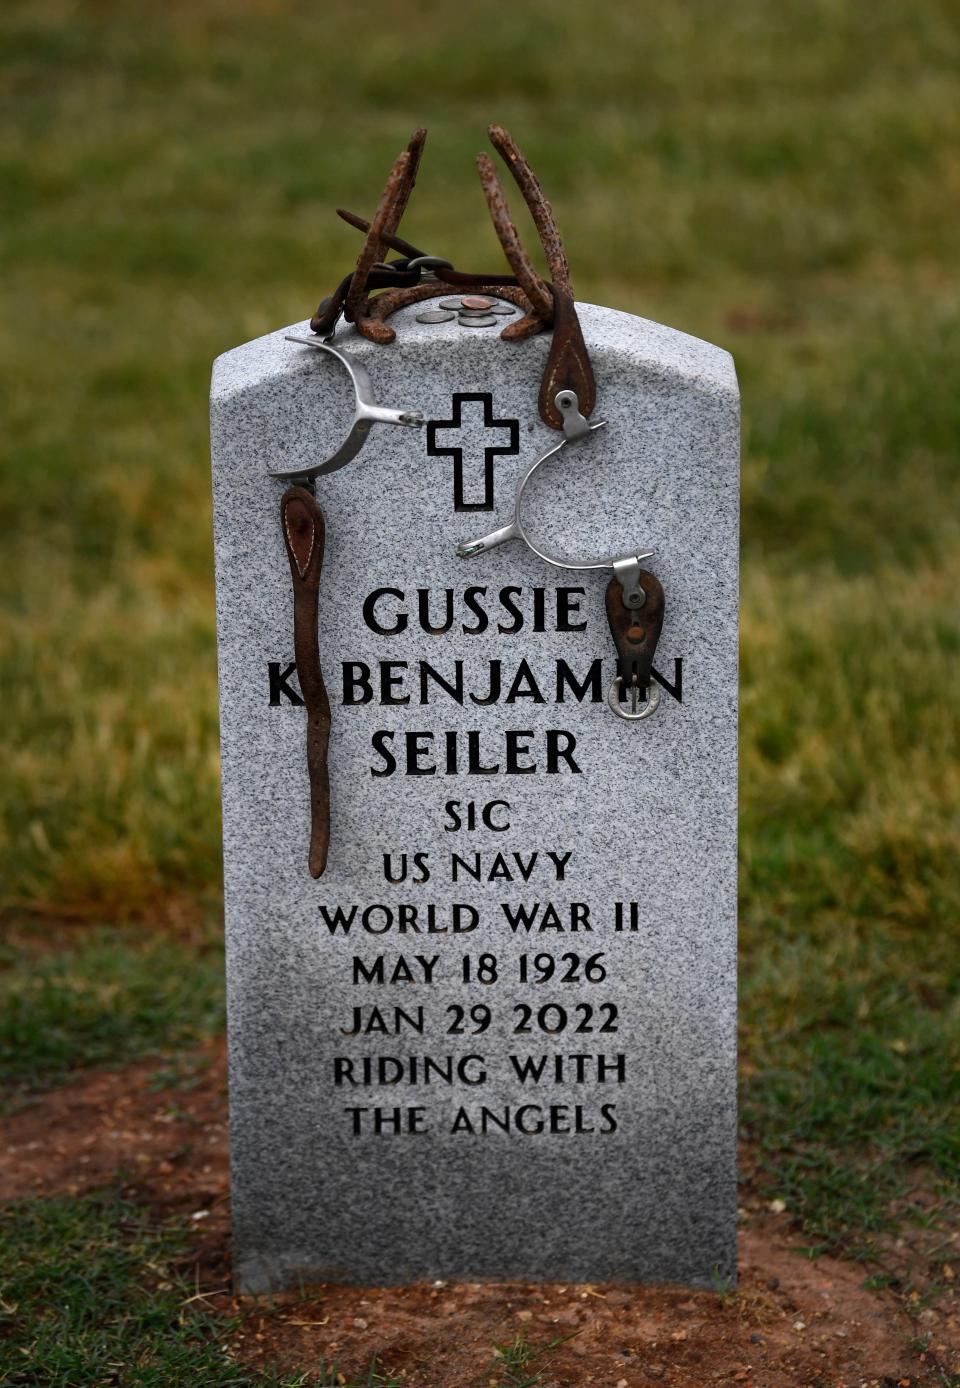 Spurs, horseshoes and coins rest atop the marker for Gussie K. Benjamin Seiler at Texas State Veterans Cemetery at Abilene Tuesday.